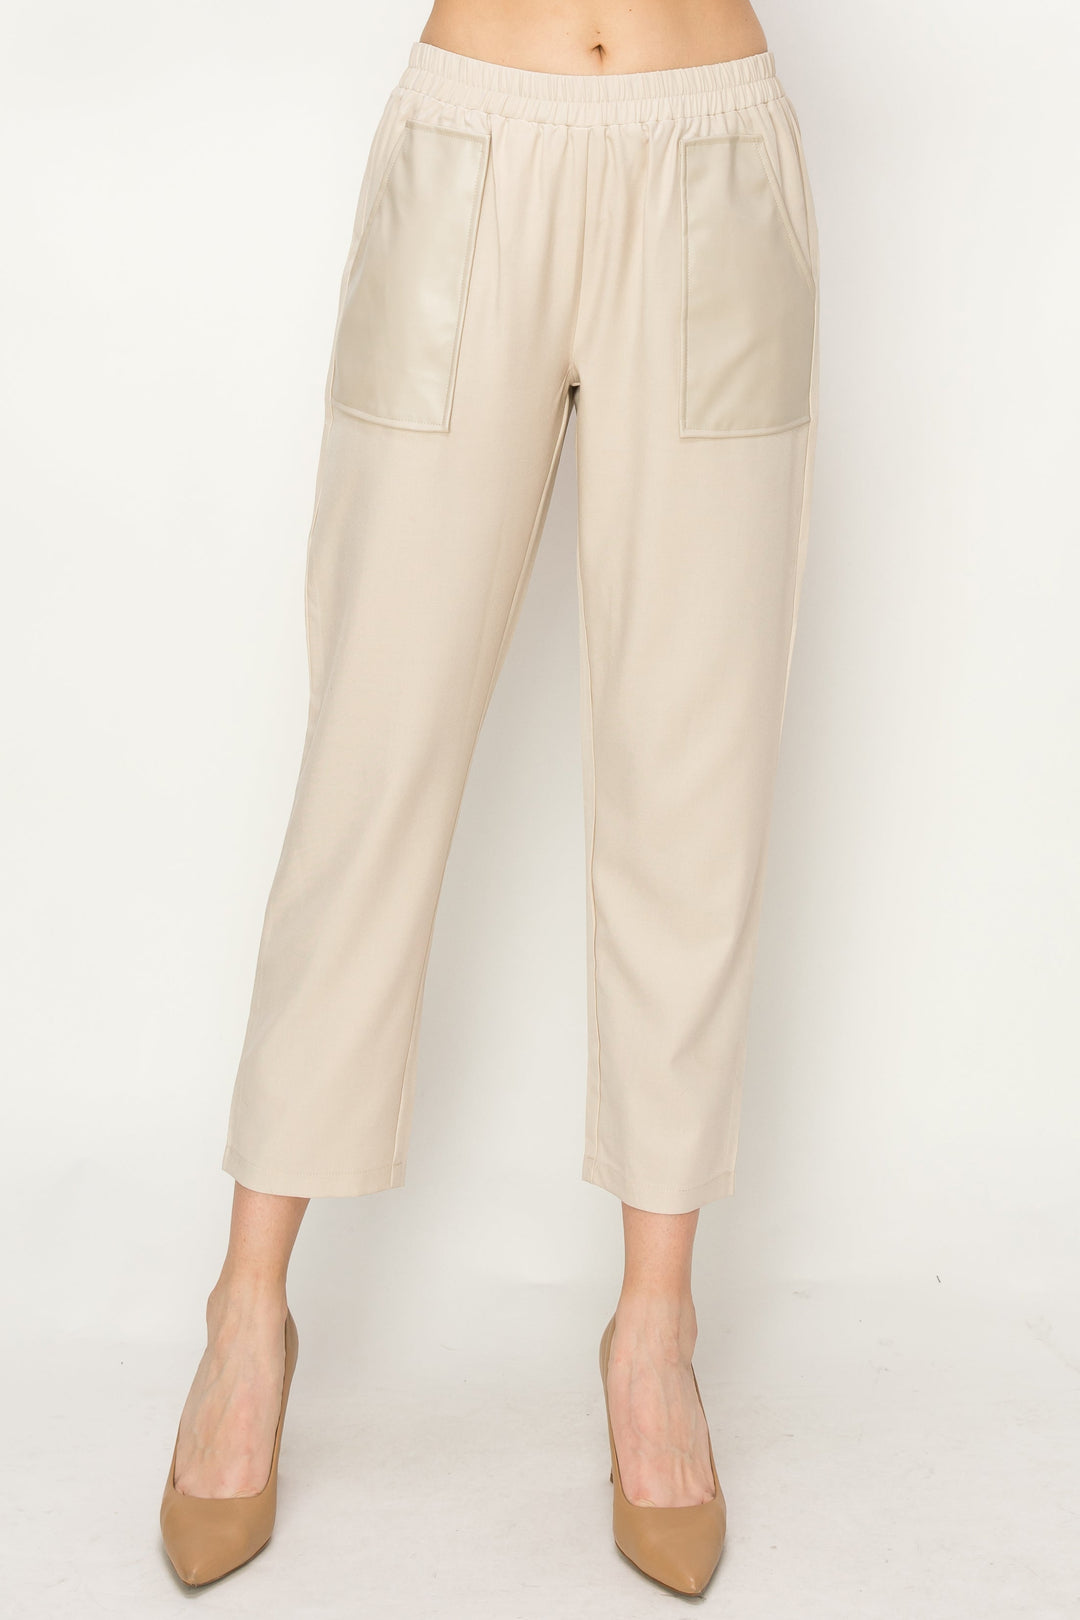 Willette Pant with Leather Pockets